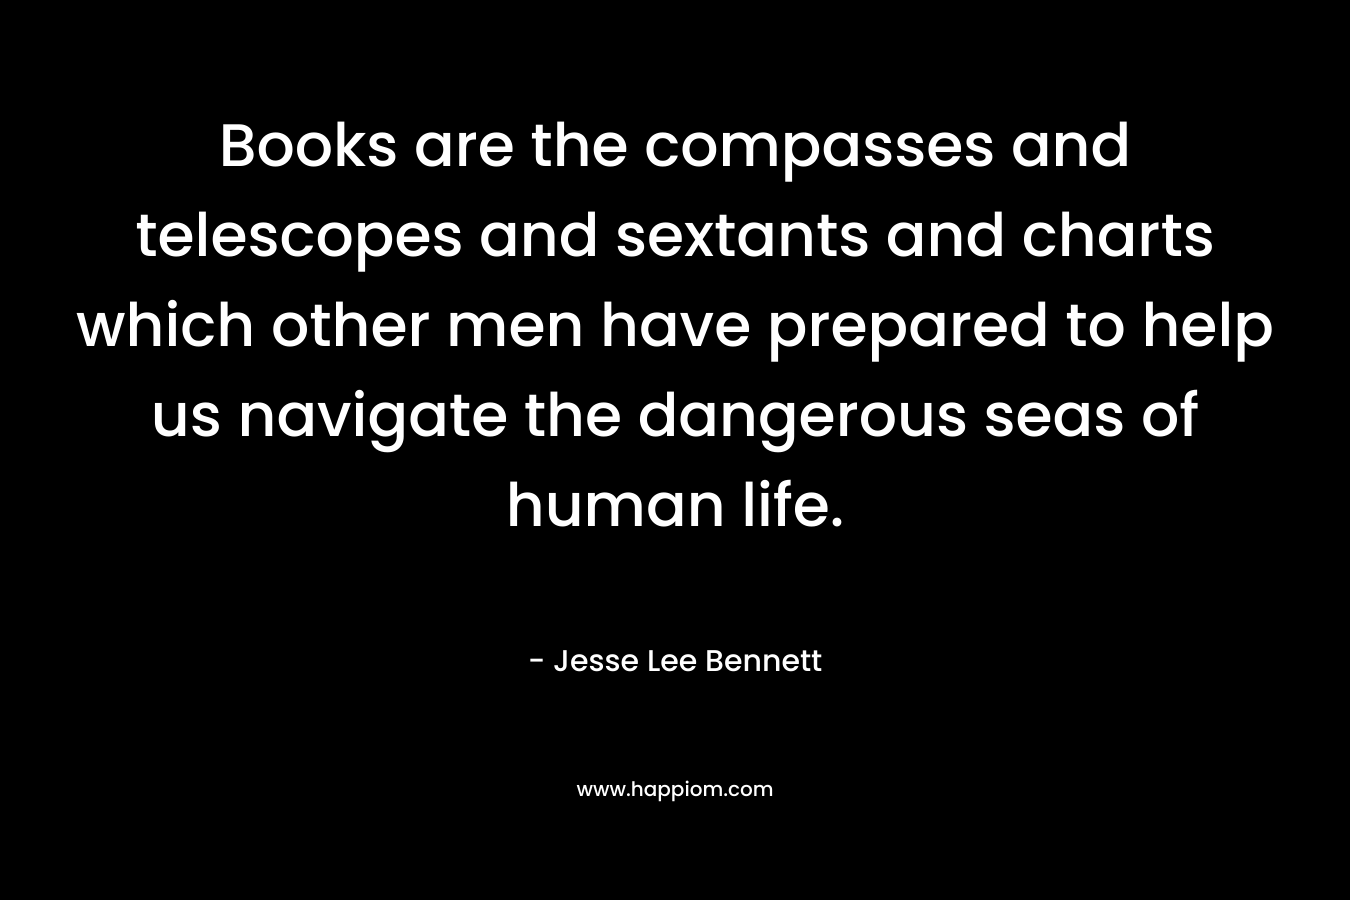 Books are the compasses and telescopes and sextants and charts which other men have prepared to help us navigate the dangerous seas of human life. – Jesse Lee Bennett